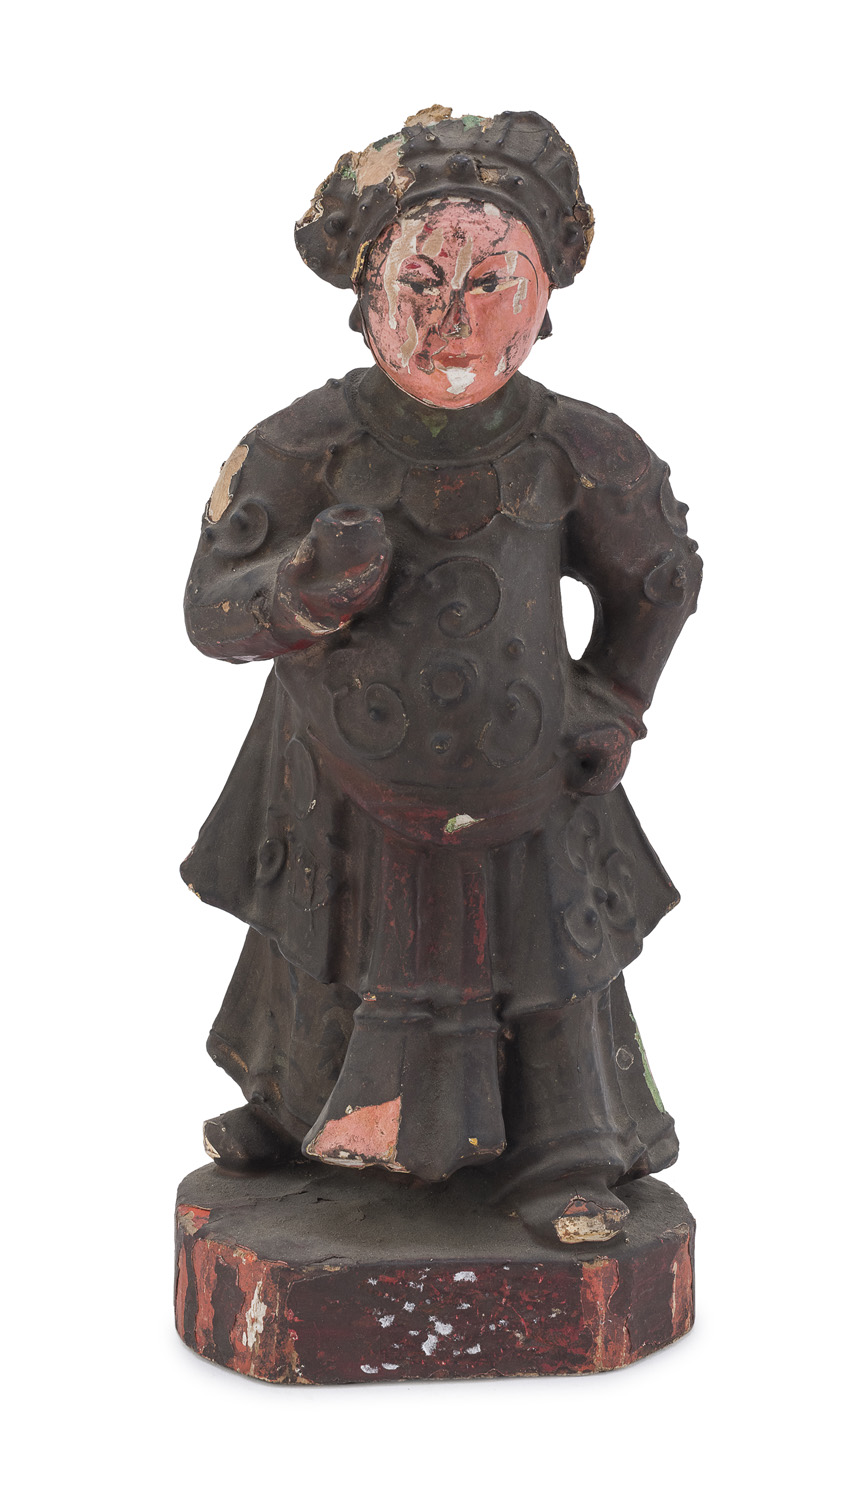 A CHINESE LAQUERED AND PAINTED WOOD SCULPTURE OF HUA MULAN. FIRST HALF 20TH CENTURY.